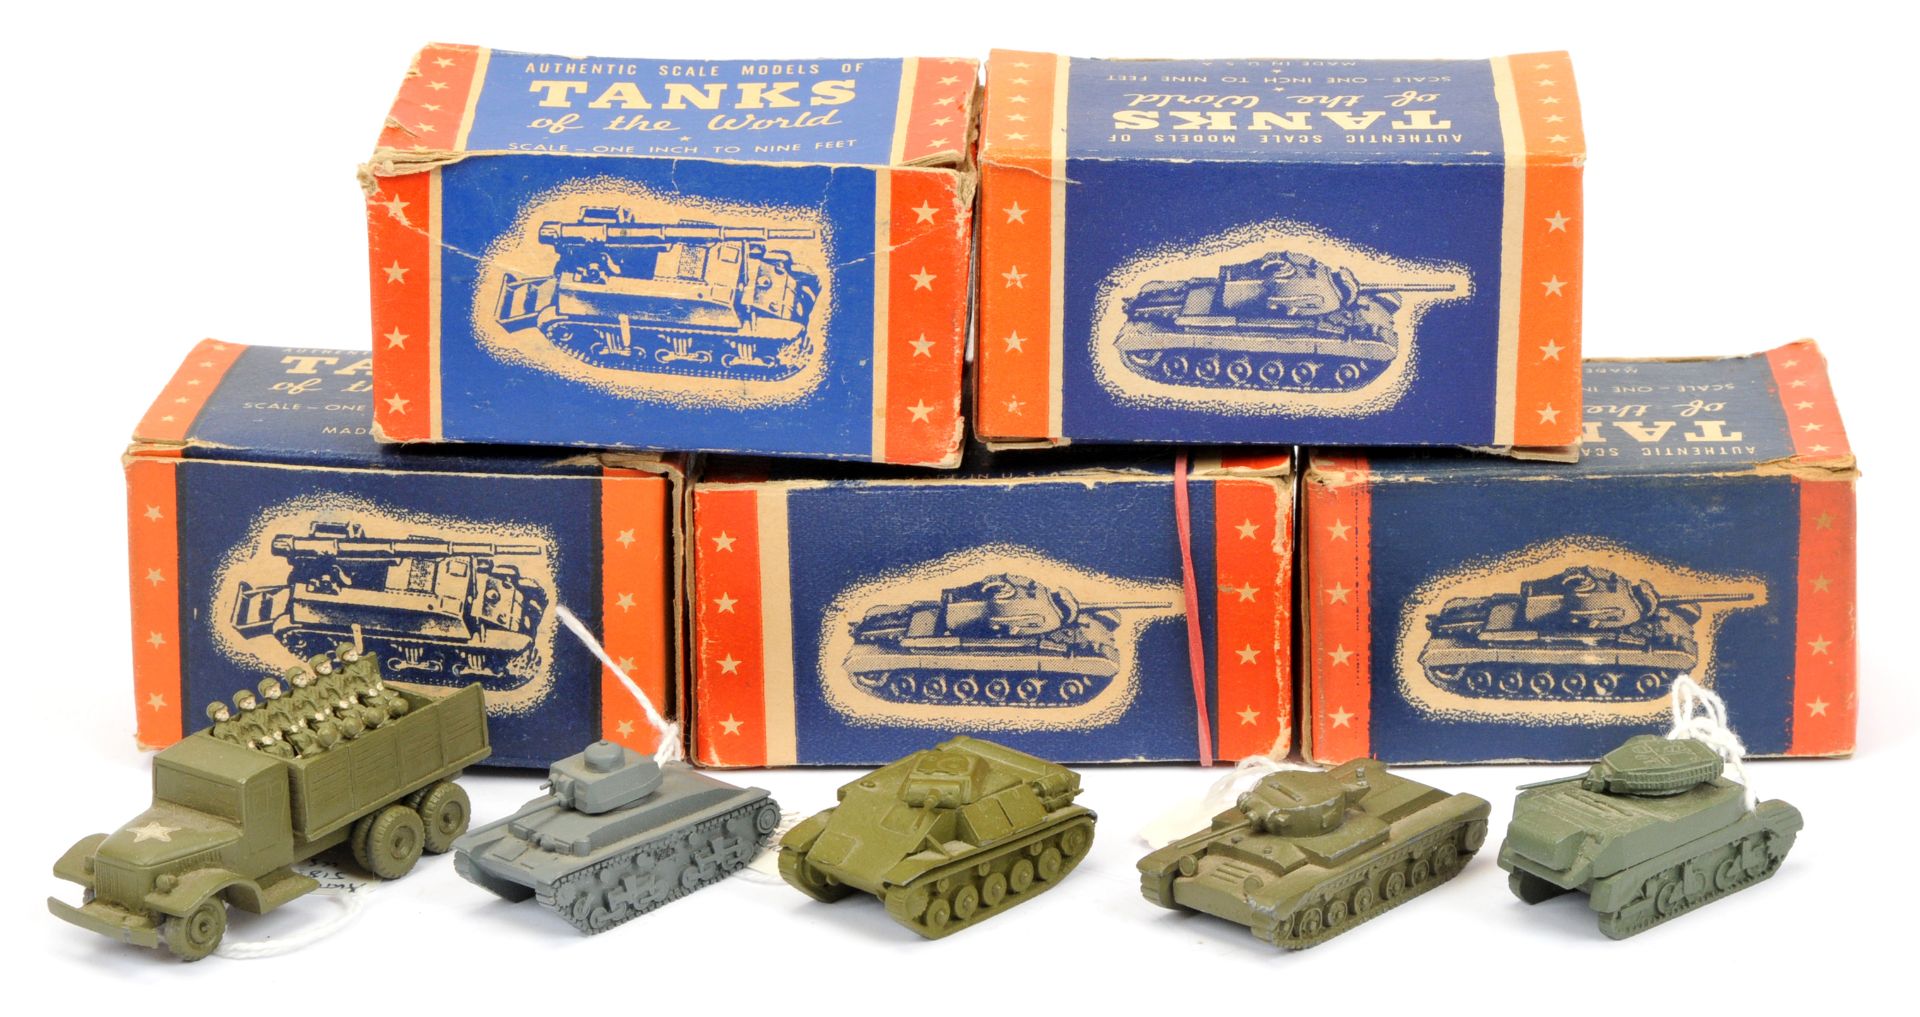 Authenticast diecast Military vehicles. group of 5 - (1) German tank grey, (2) Us tank green,